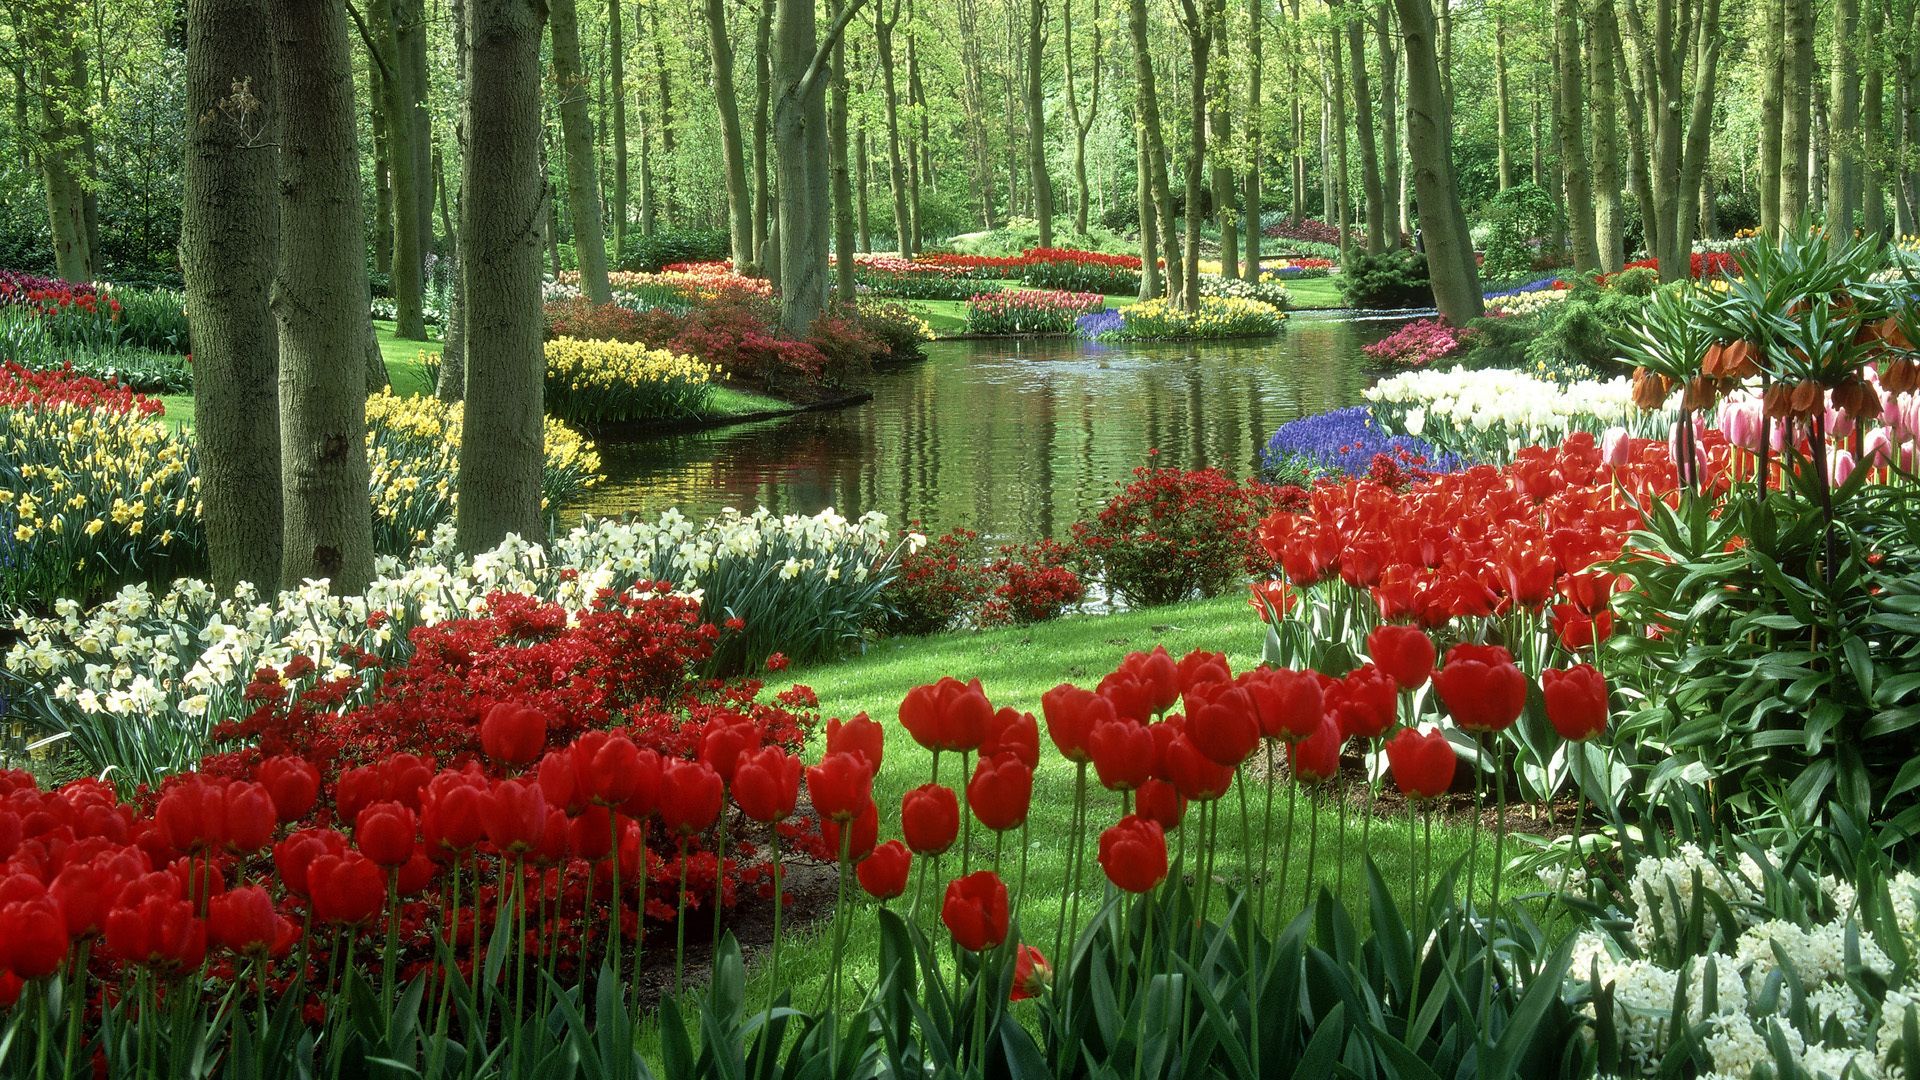 Man Made Garden Tulips Spring Nature Free HQ Image